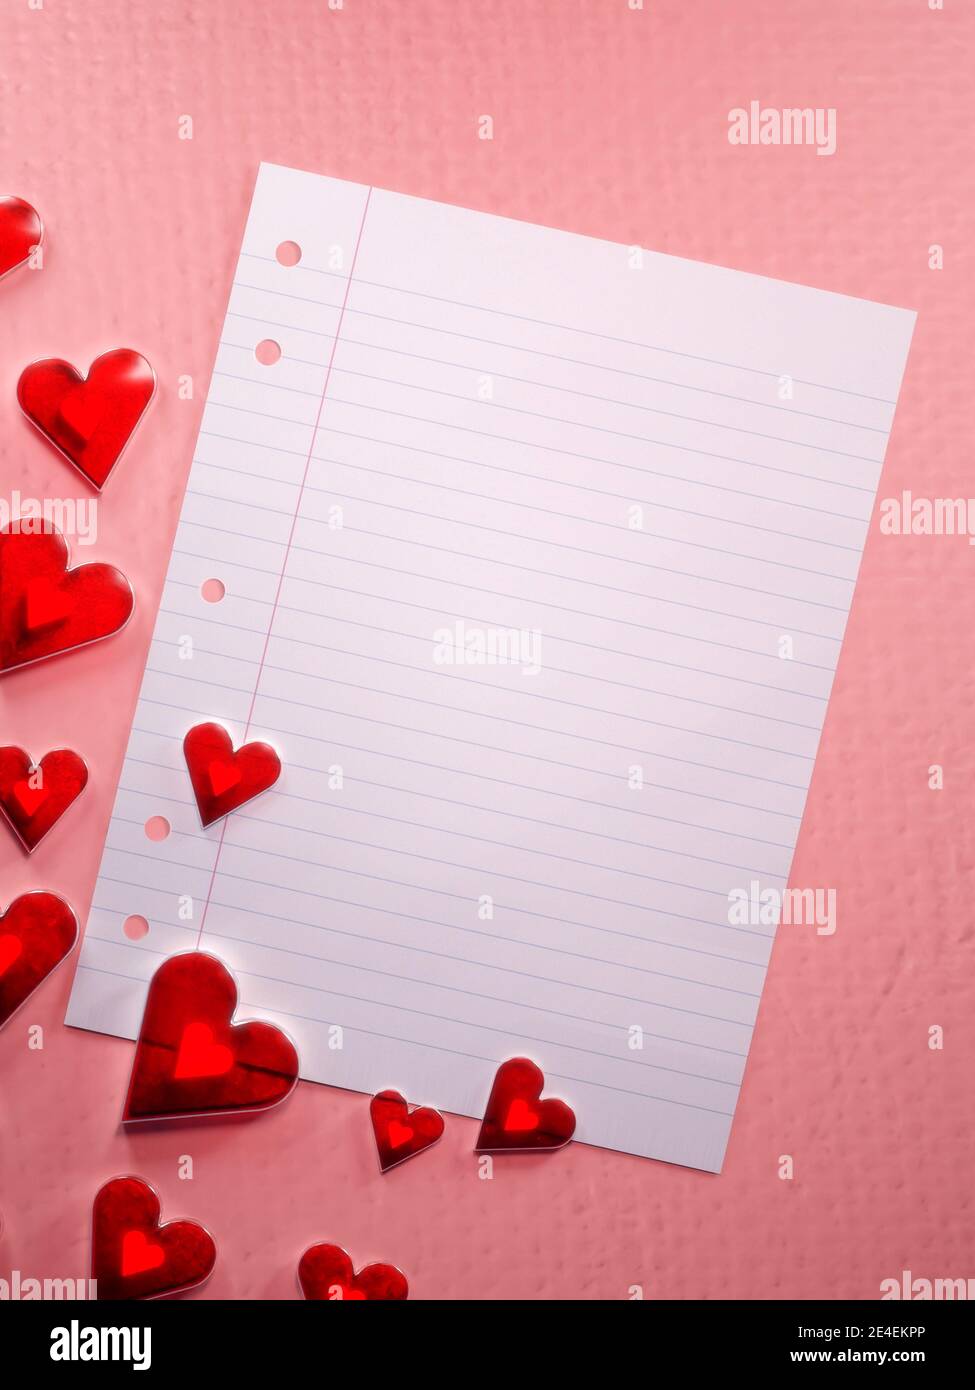 Valentine's day, love letter template background. Translucent